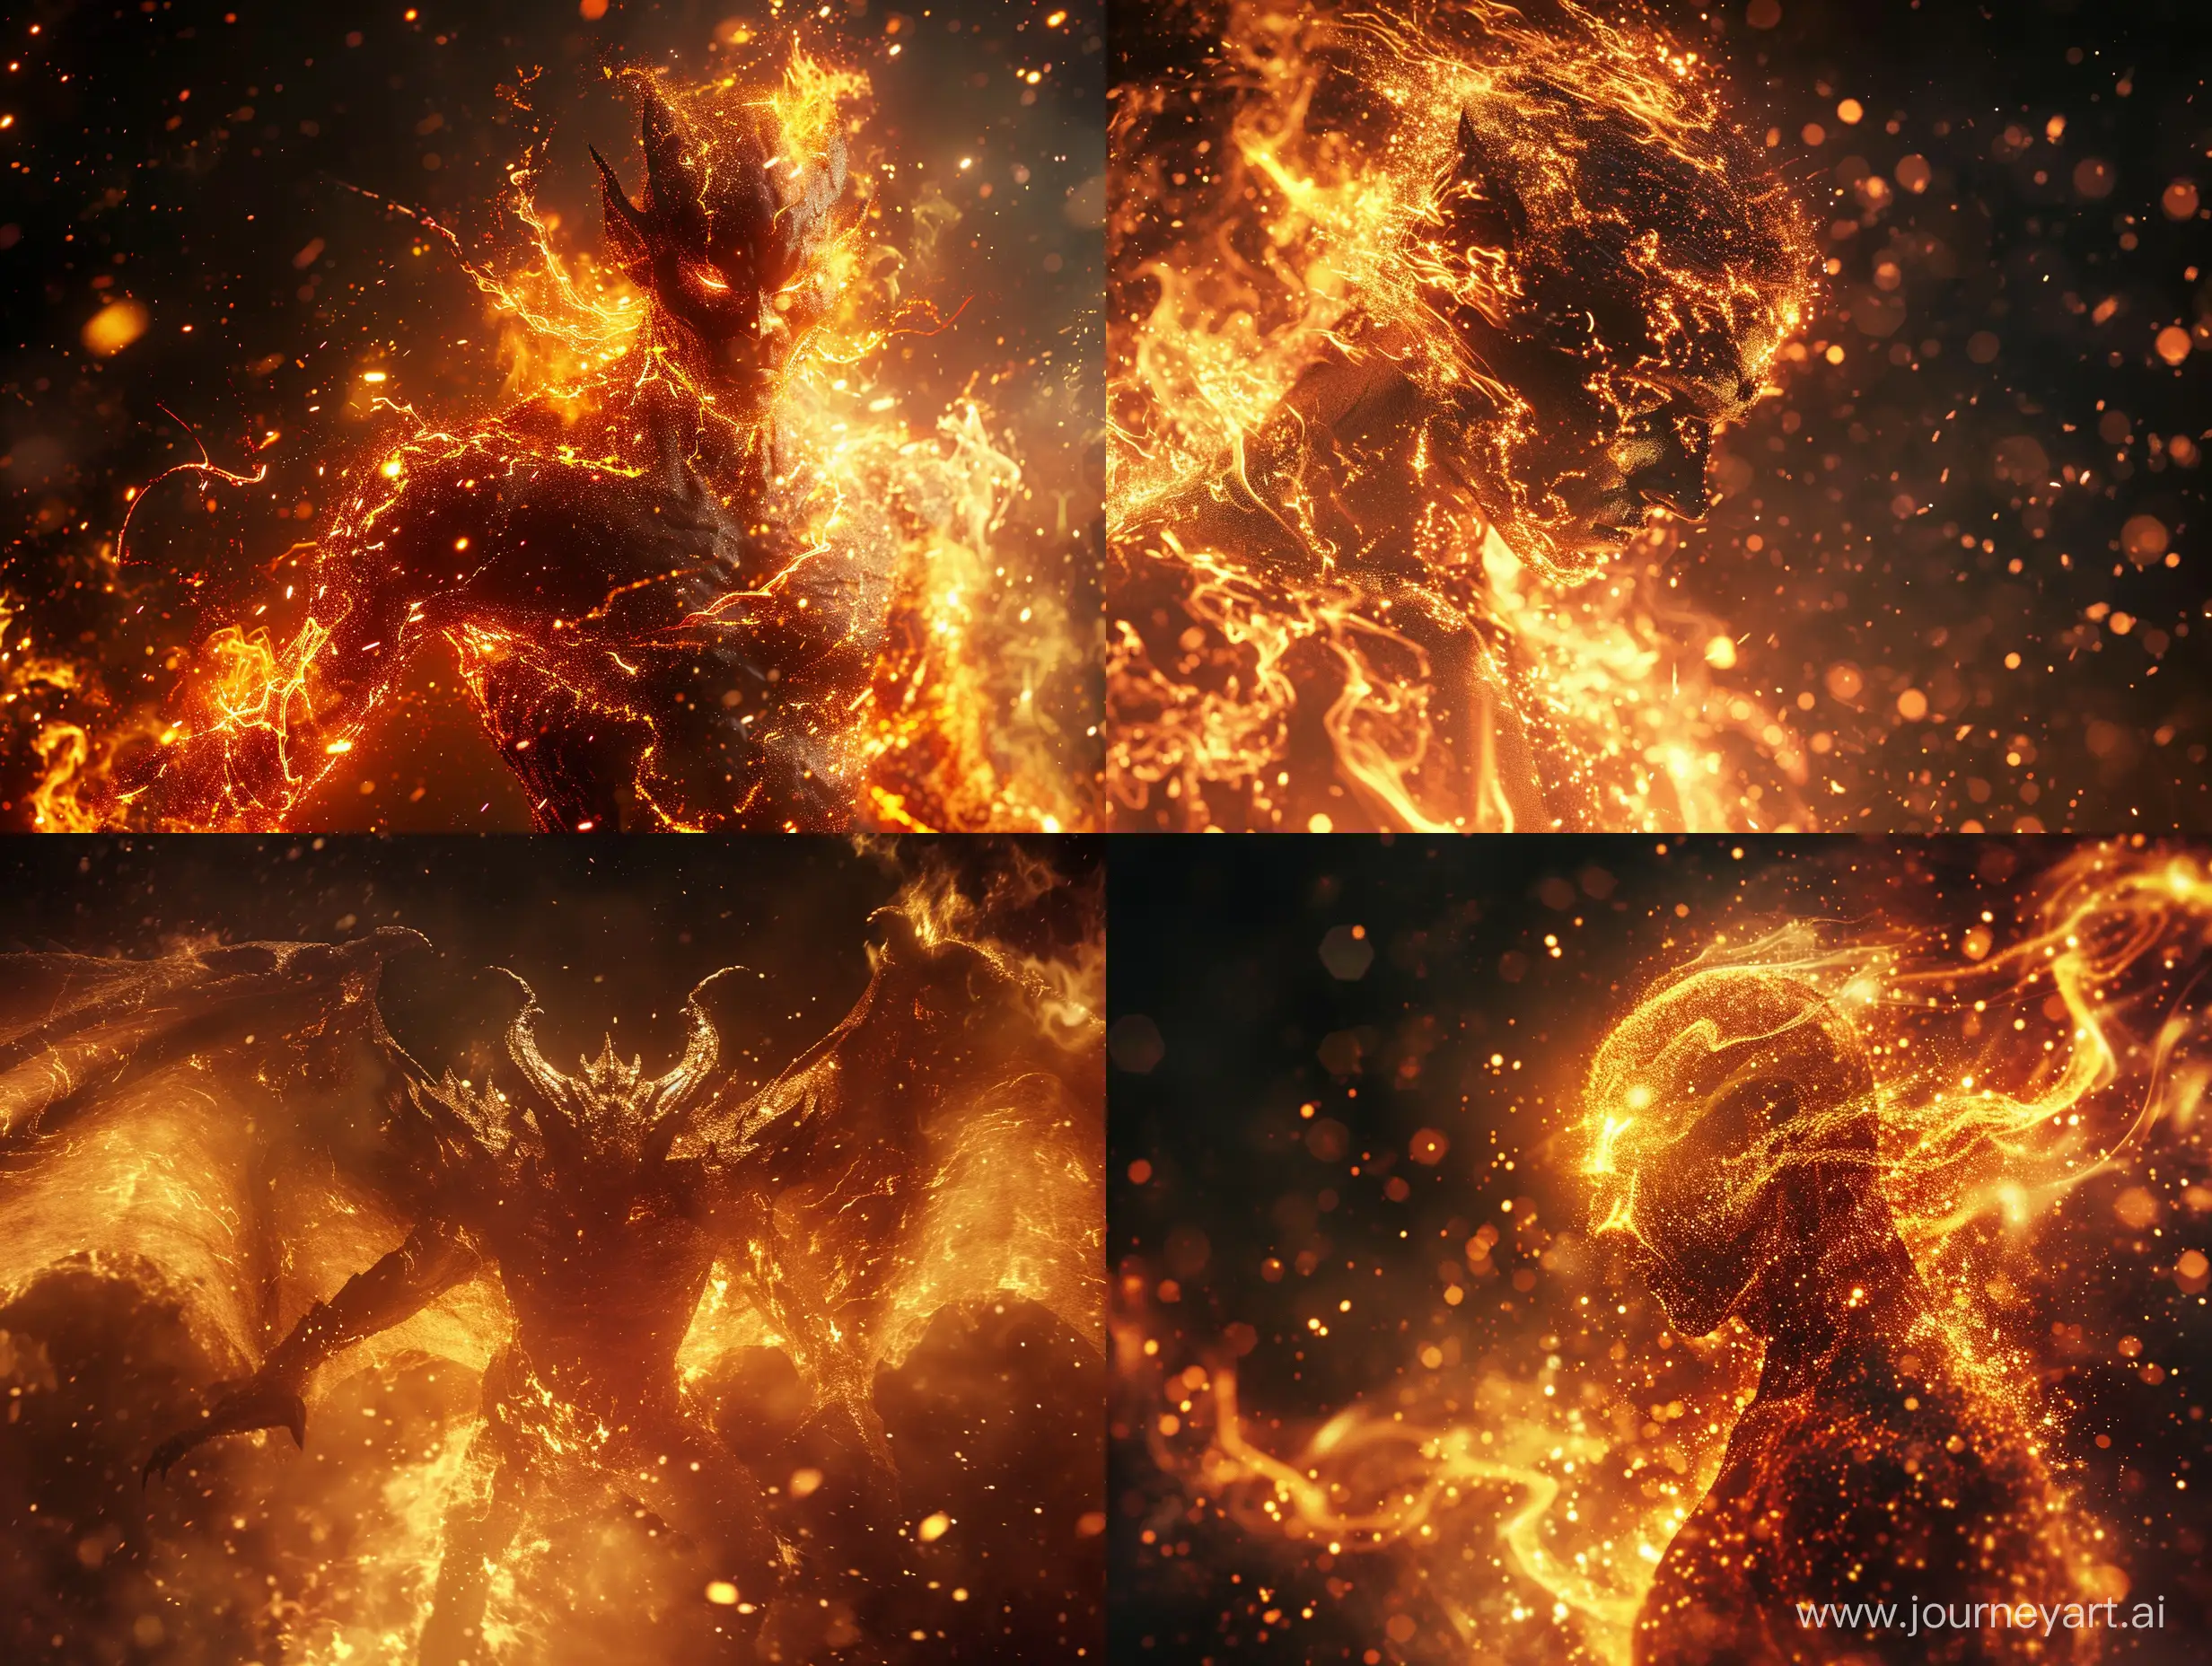 Vivid-Hell-Demon-Enchanting-FireInfused-Creature-Captured-in-HighQuality-DSLR-Image